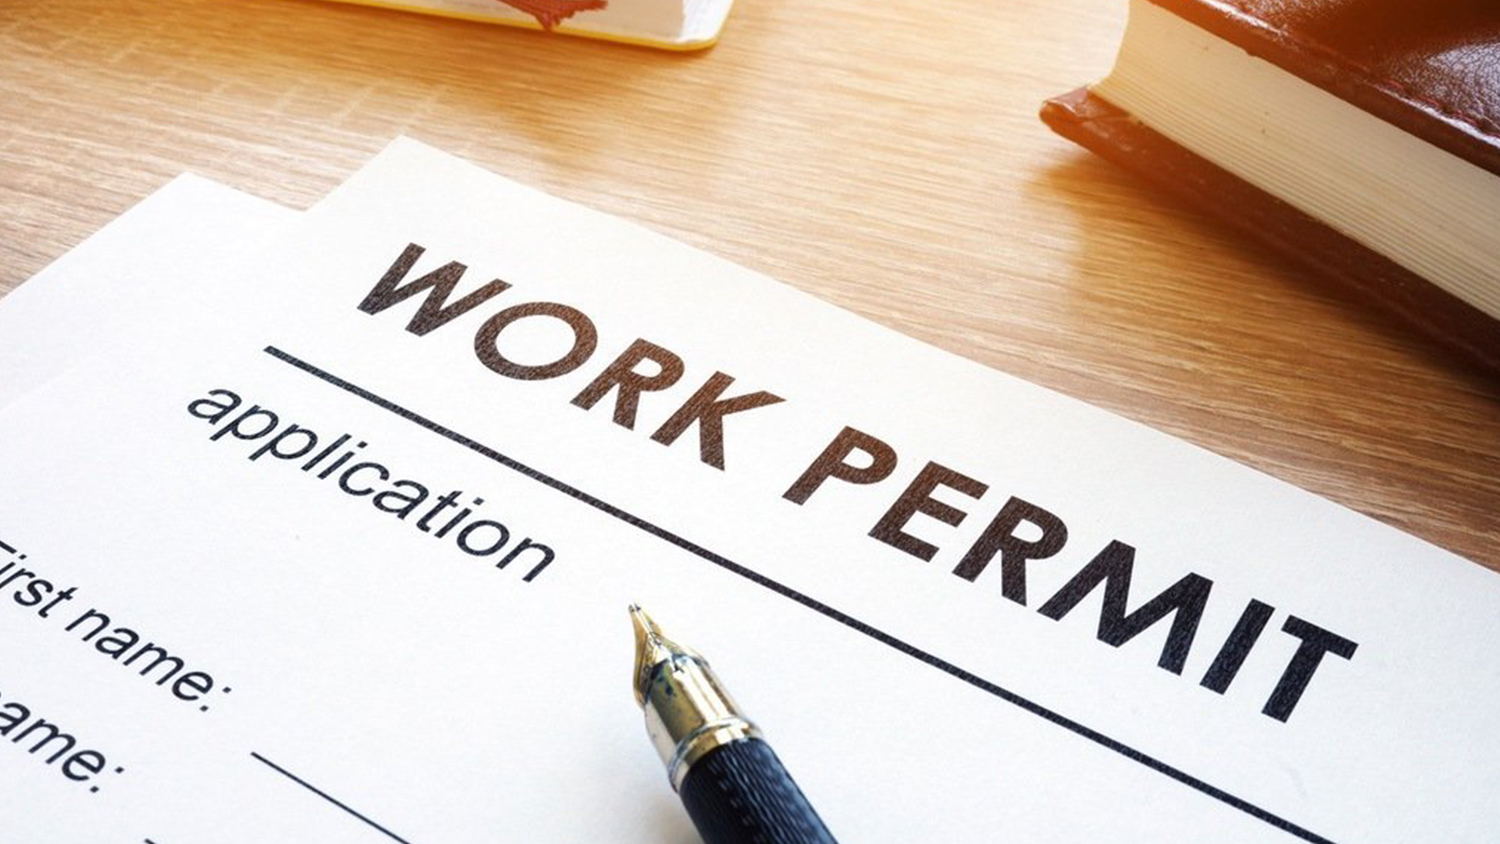 Extension of public policy allowing visitors to apply for work permits ...